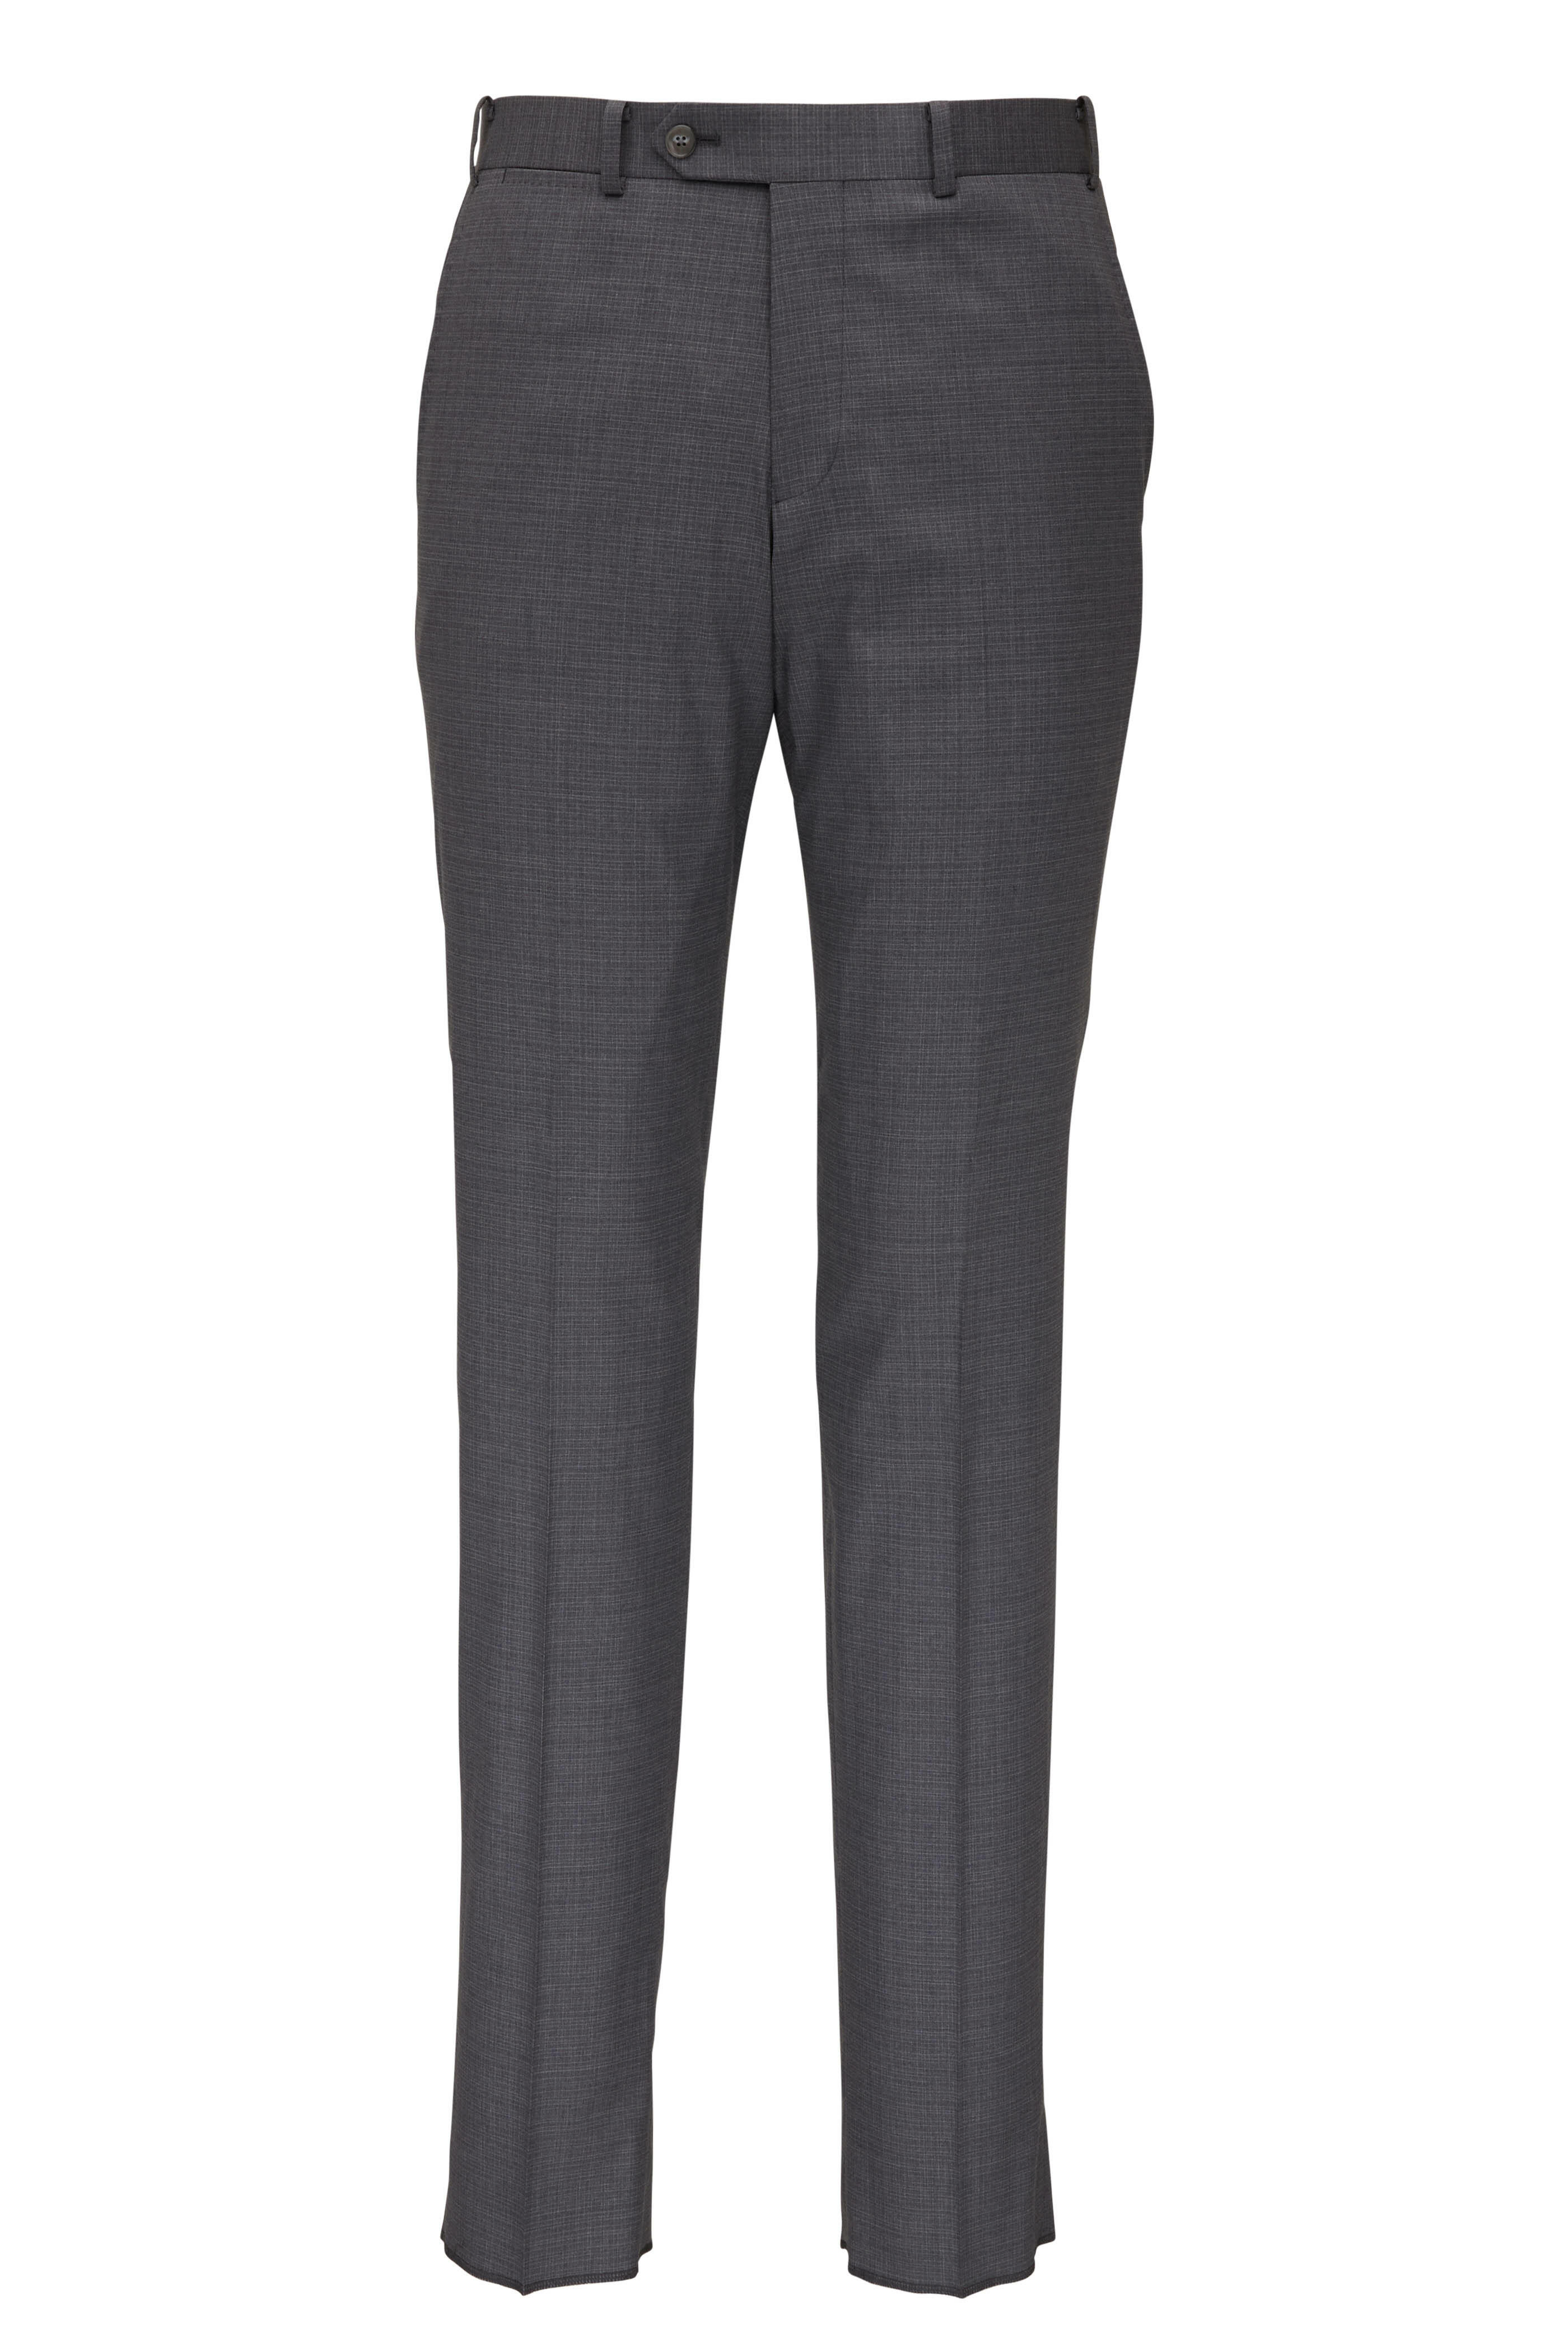 Atelier Munro - Stone Gray Micro Check Suit | Mitchell Stores